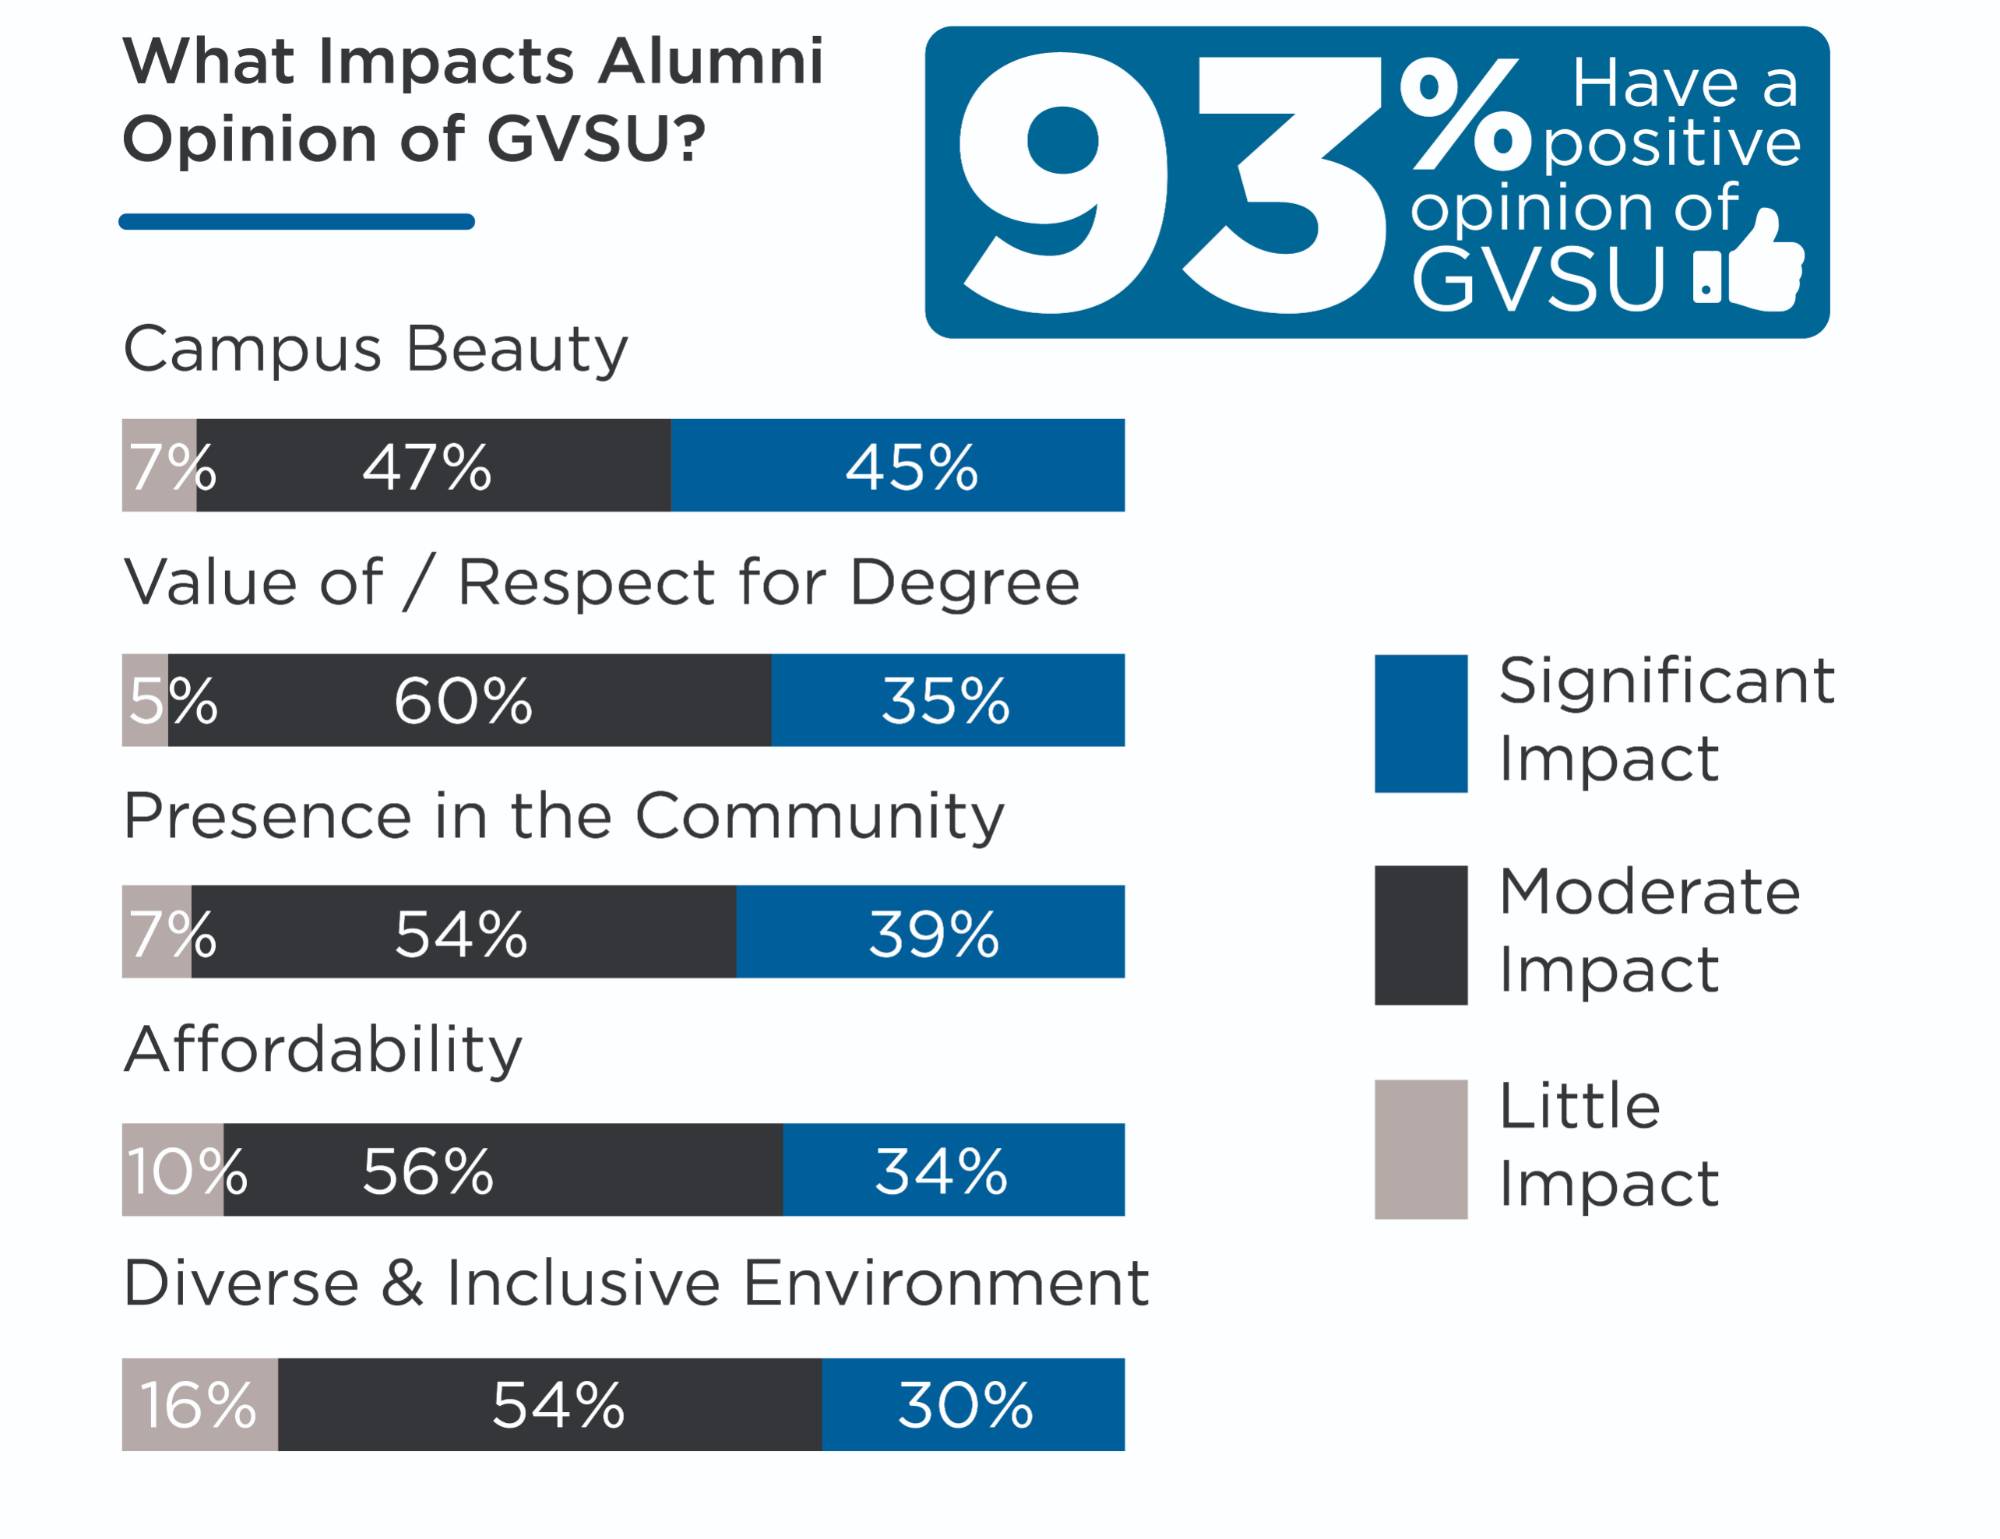 What Impacts Alumni Opinion of GVSU? Campus Beauty: 7% say this has a Little Impact, 47% say it has a Moderate Impact, and 45% says it has a Significant Impact. Value of / Respect for Degree: 5% say this has a Little Impact, 60% say it has a Moderate Impact, and 35% says it has a Significant Impact.  Presence in the Community: 7% say this has a Little Impact, 54% say it has a Moderate Impact, and 39% says it has a Significant Impact.  Affordability: 10% say this has a Little Impact, 56% say it has a Moderate Impact, and 34% says it has a Significant Impact.  Diverse & Inclusive Environment: 16% say this has a Little Impact, 54% say it has a Moderate Impact, and 30% says it has a Significant Impact. 93% of respondents have a positive opinion of GVSU.